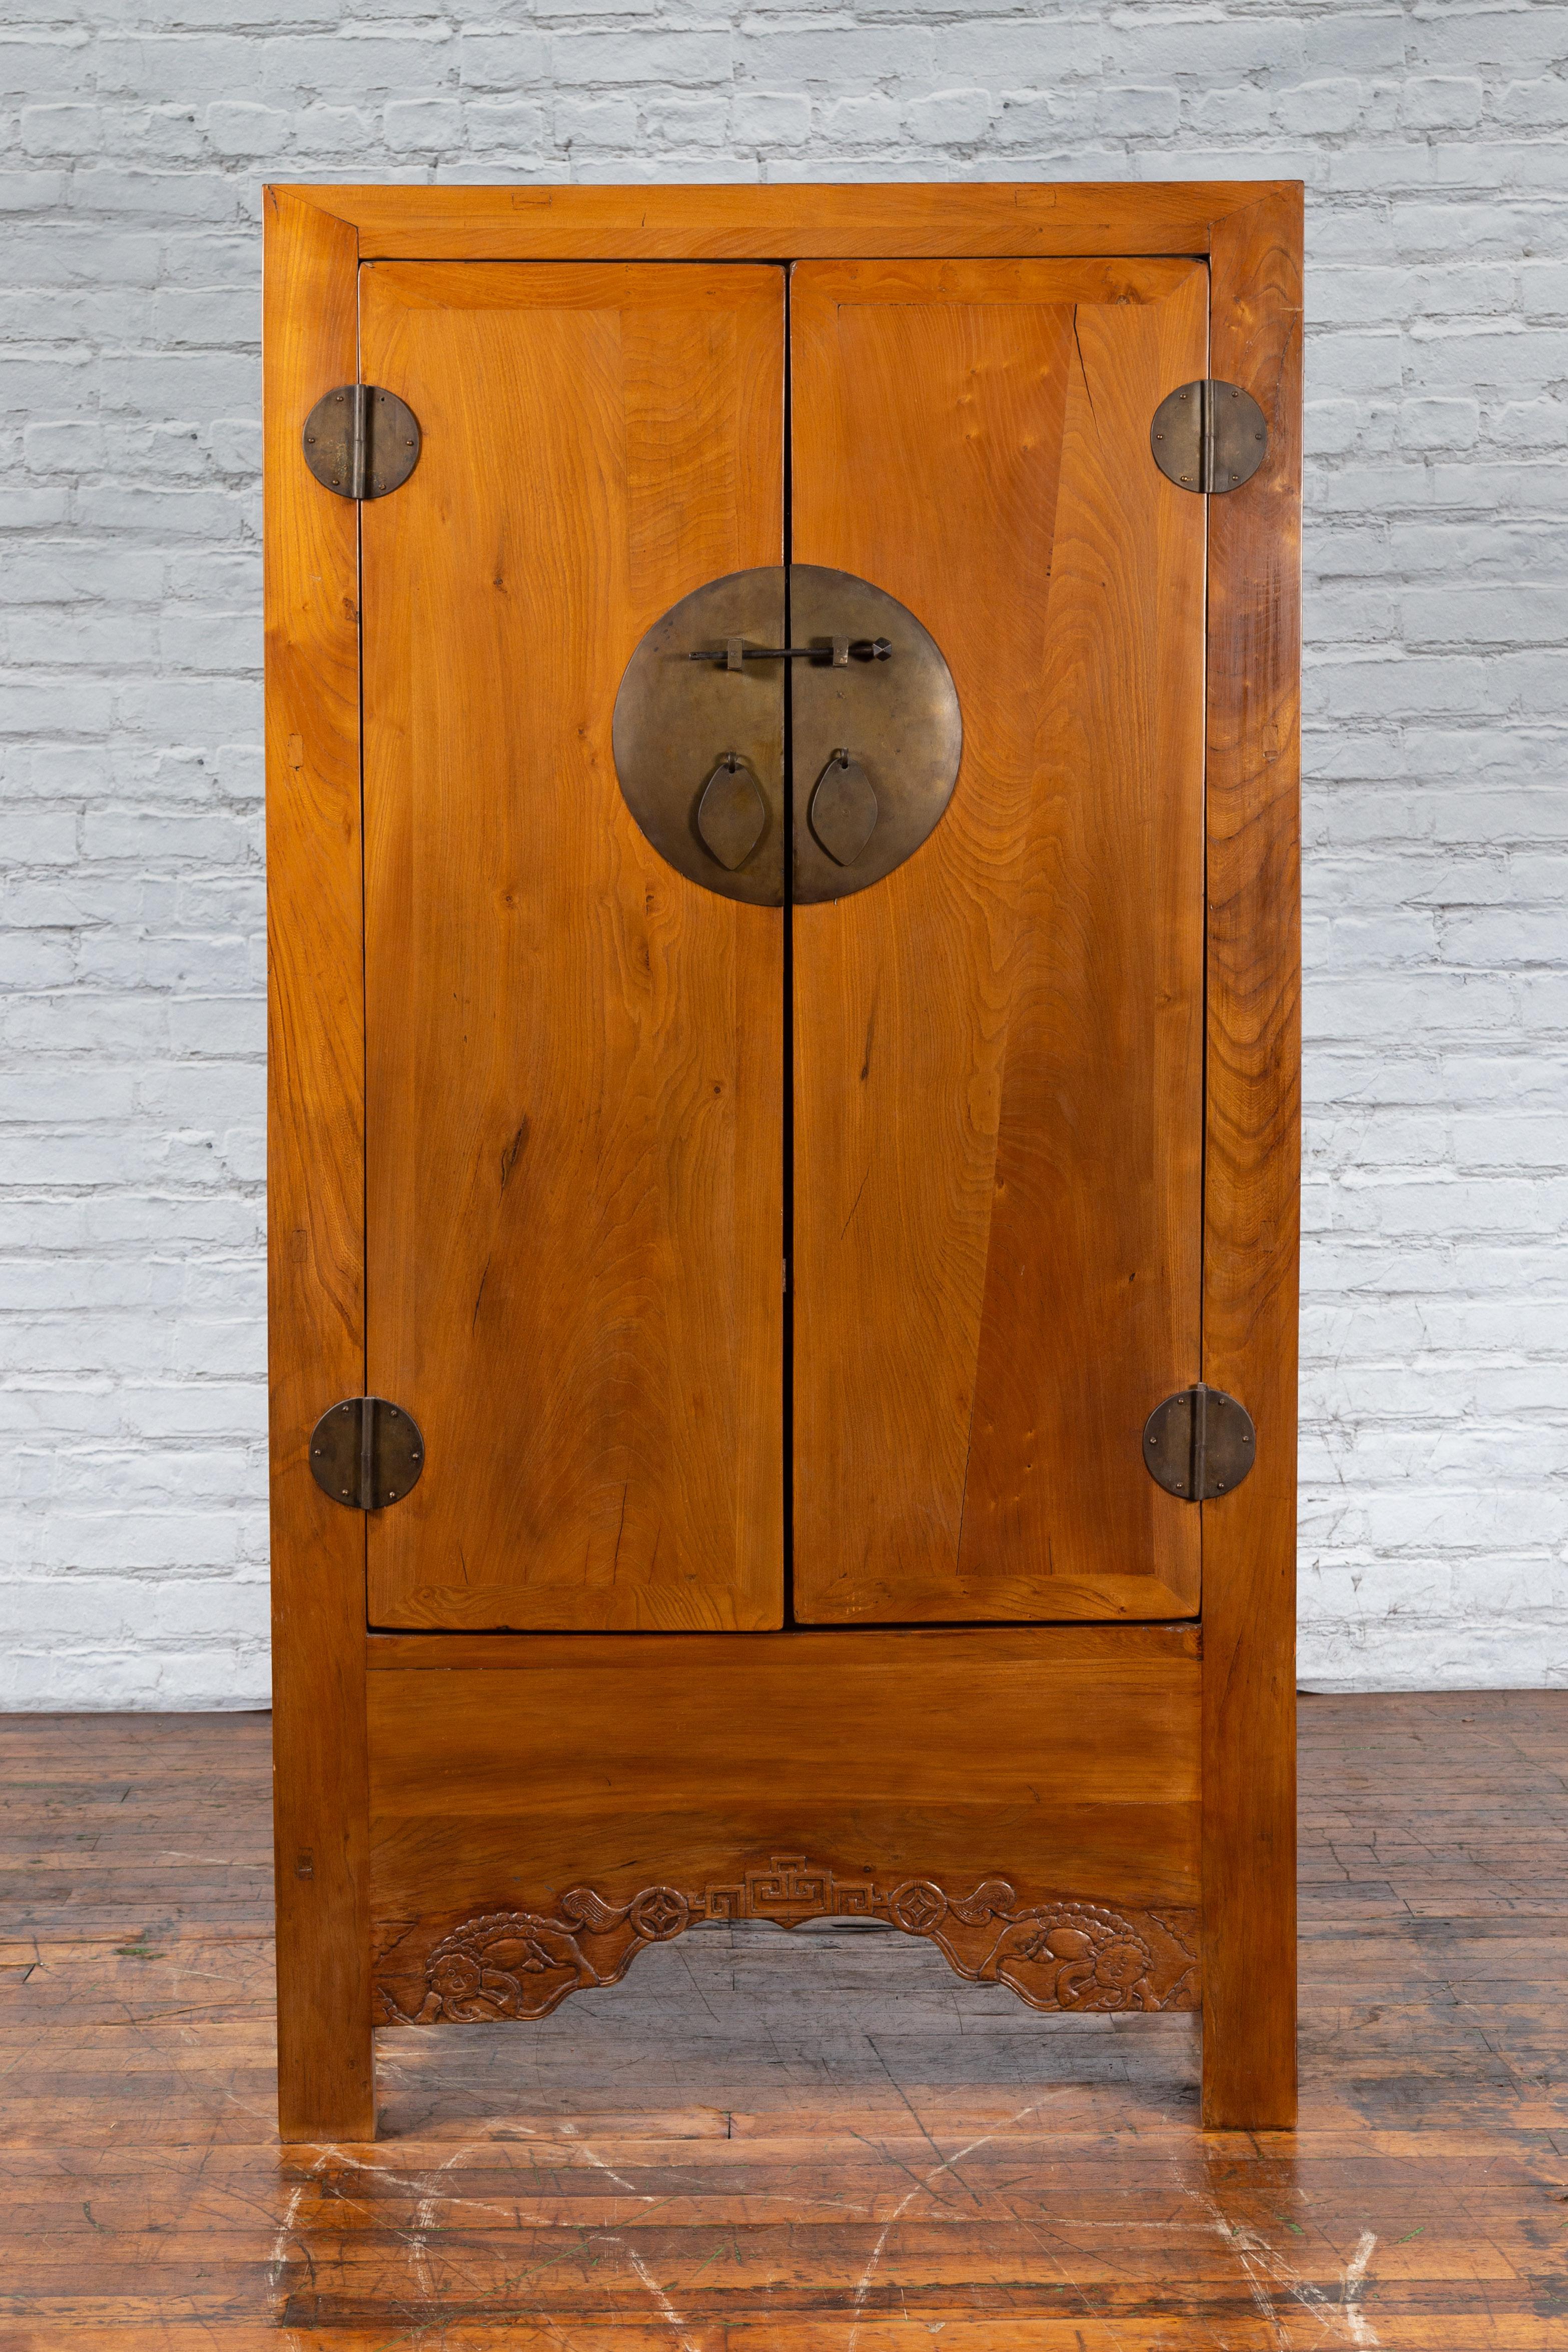 A Chinese Qing Dynasty period wooden cabinet from the 19th century, with round medallion hardware. Created in China during the Qing Dynasty, this wooden cabinet features two large doors opening thanks to a large bronze medallion to reveal an inner